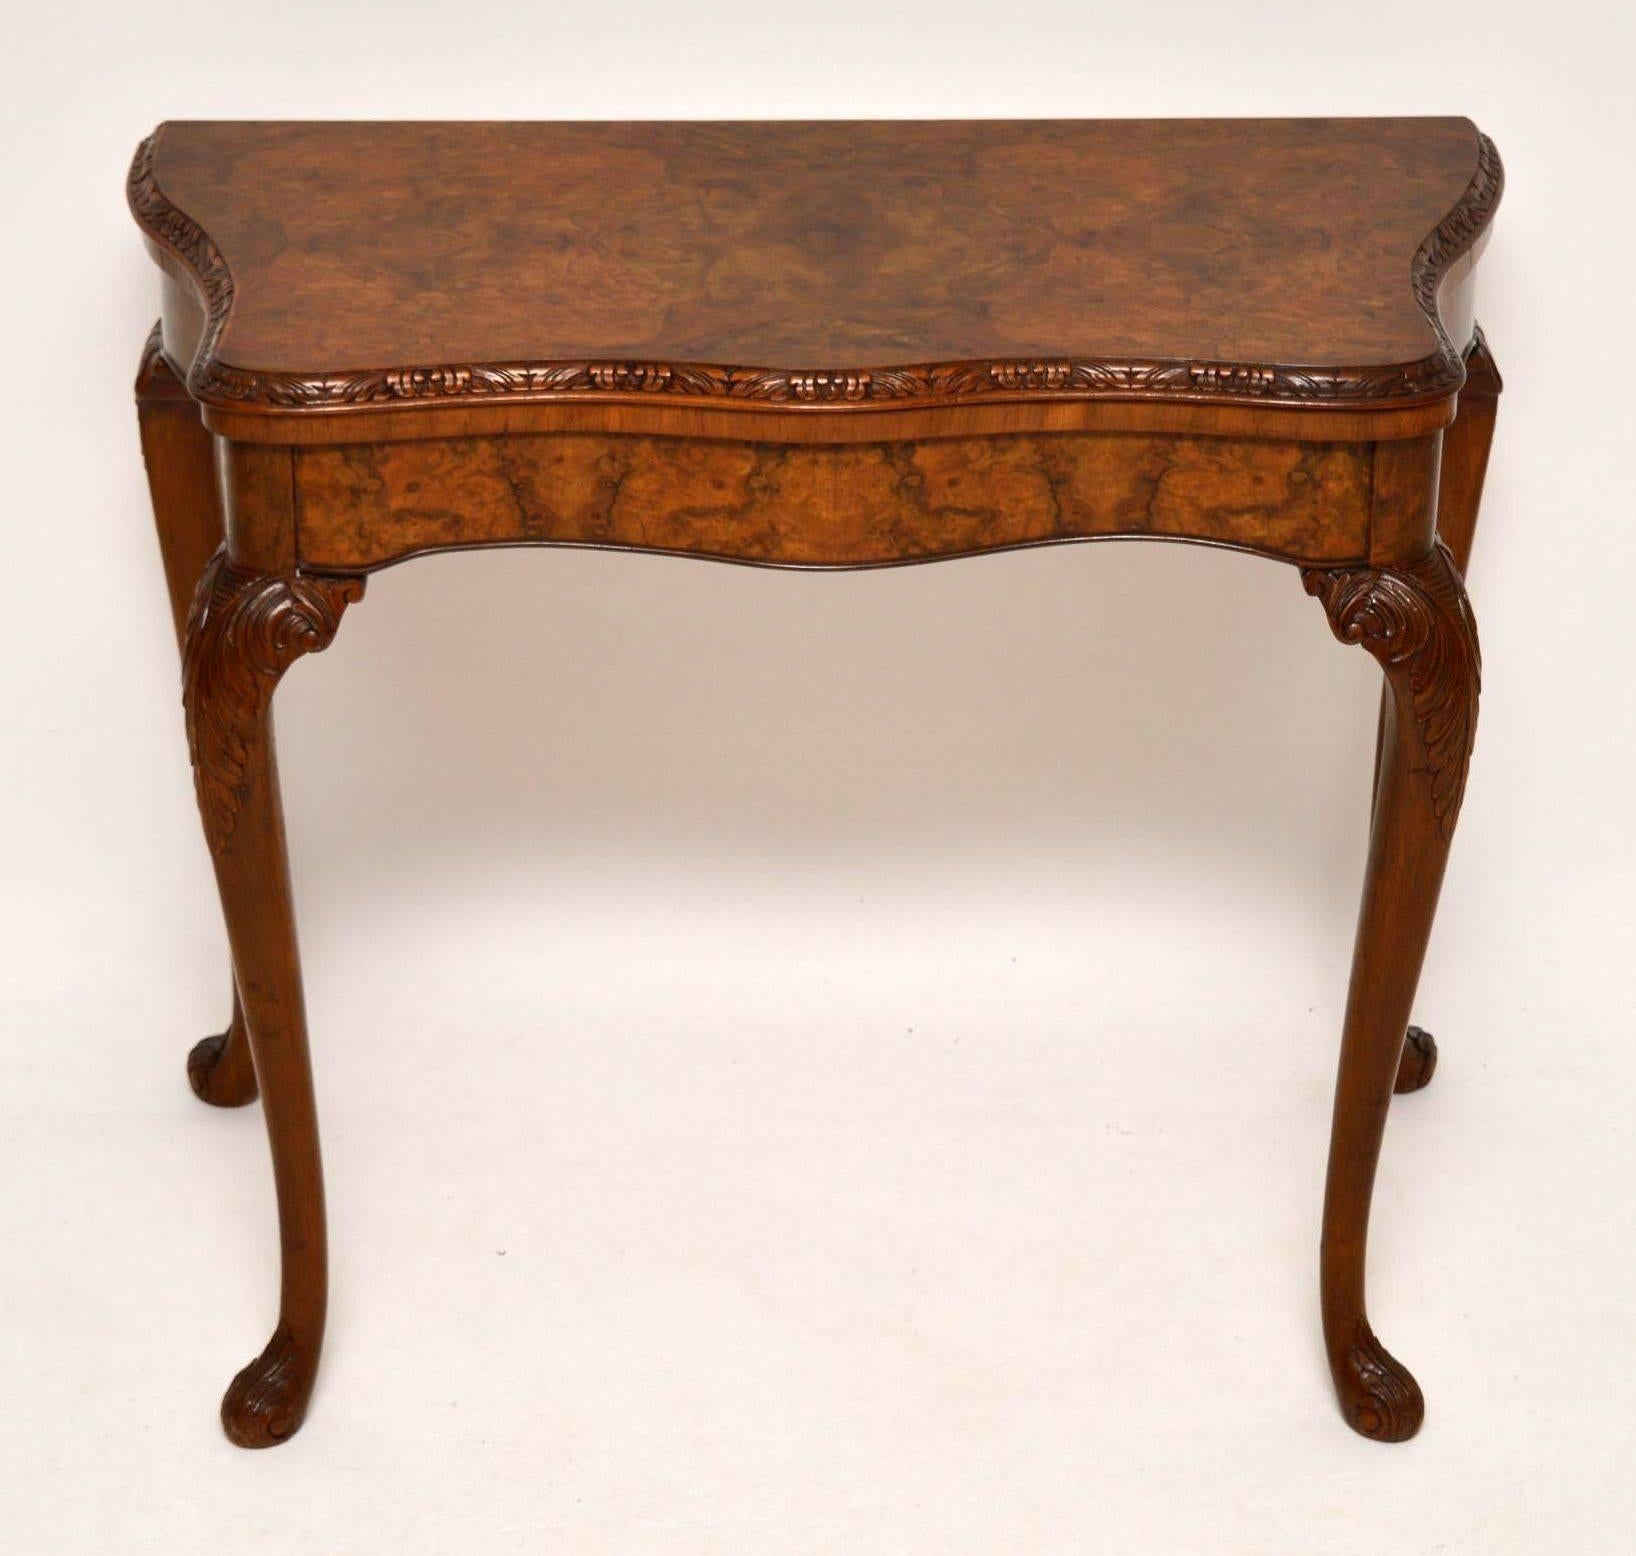 Very smart antique walnut card table in lovely condition dating from around the 1920s-1930s period. It has a lovely shape all-over and can be used as a side table or card table. The top, front and side edges have stunning burr walnut veneers. The